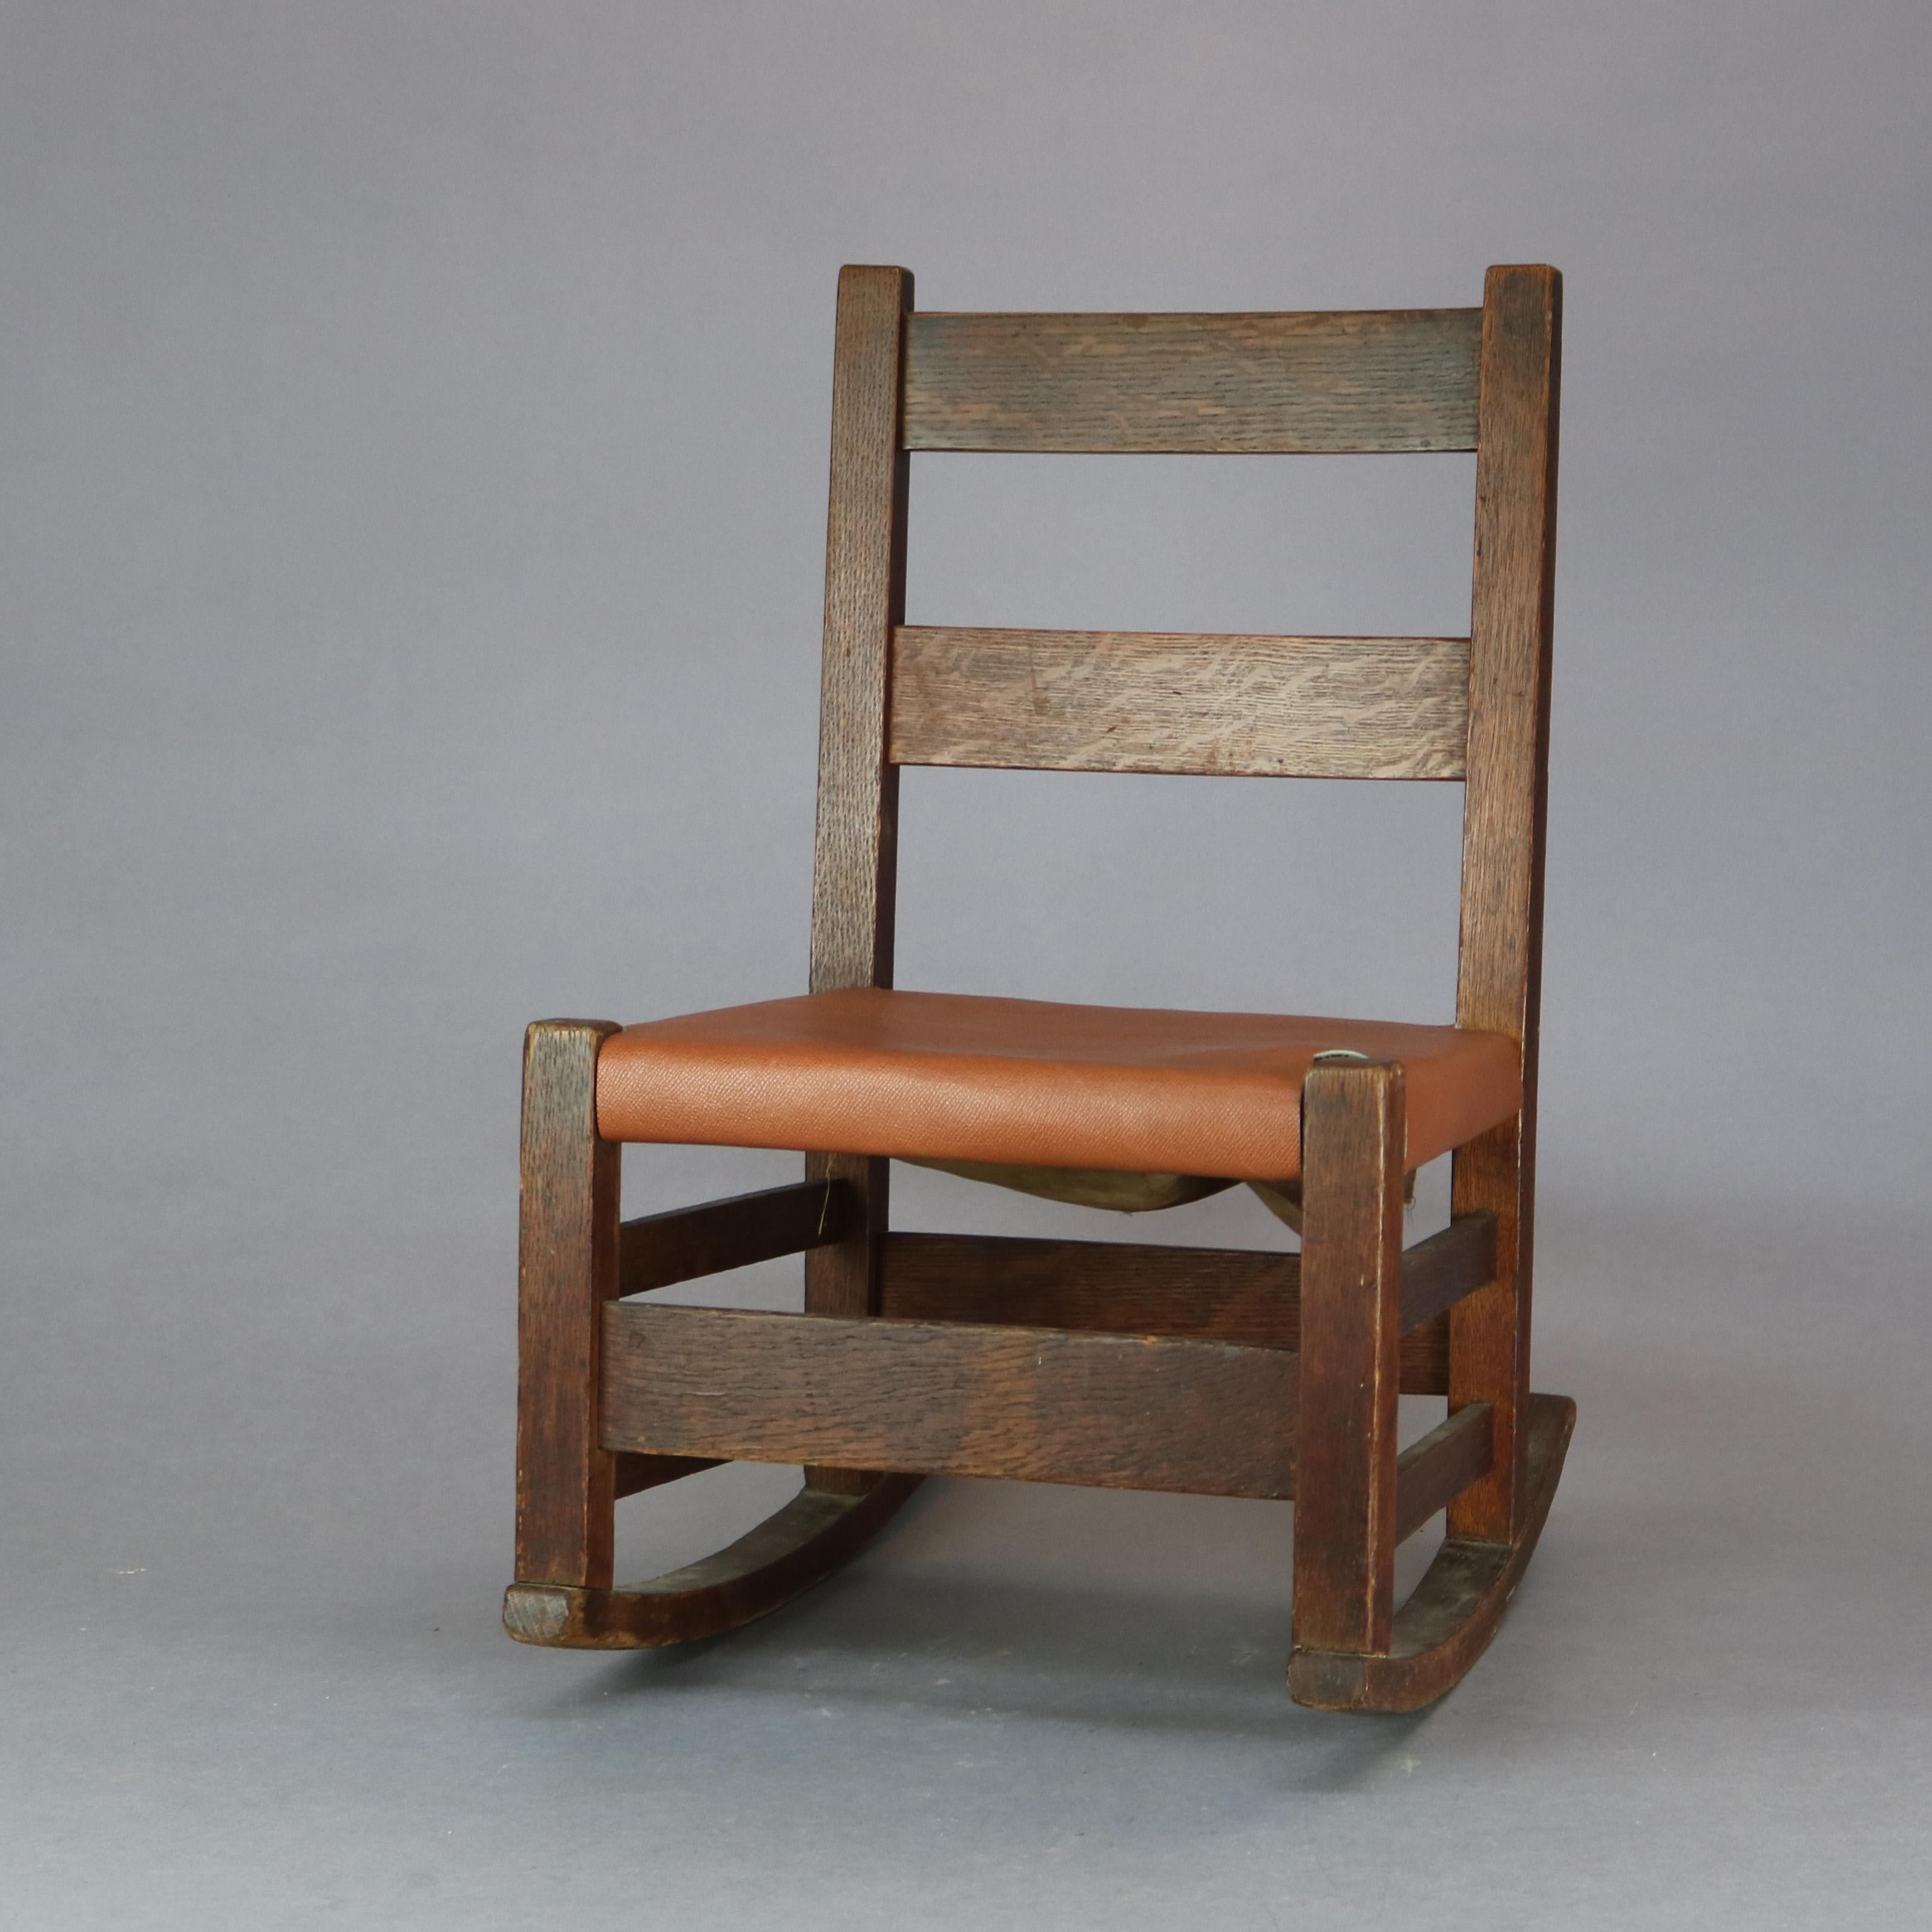 An antique Arts & Crafts Mission child's rocker by Gustav Stickley offers oak construction with ladder back, unsigned, c1910

Measures: 23